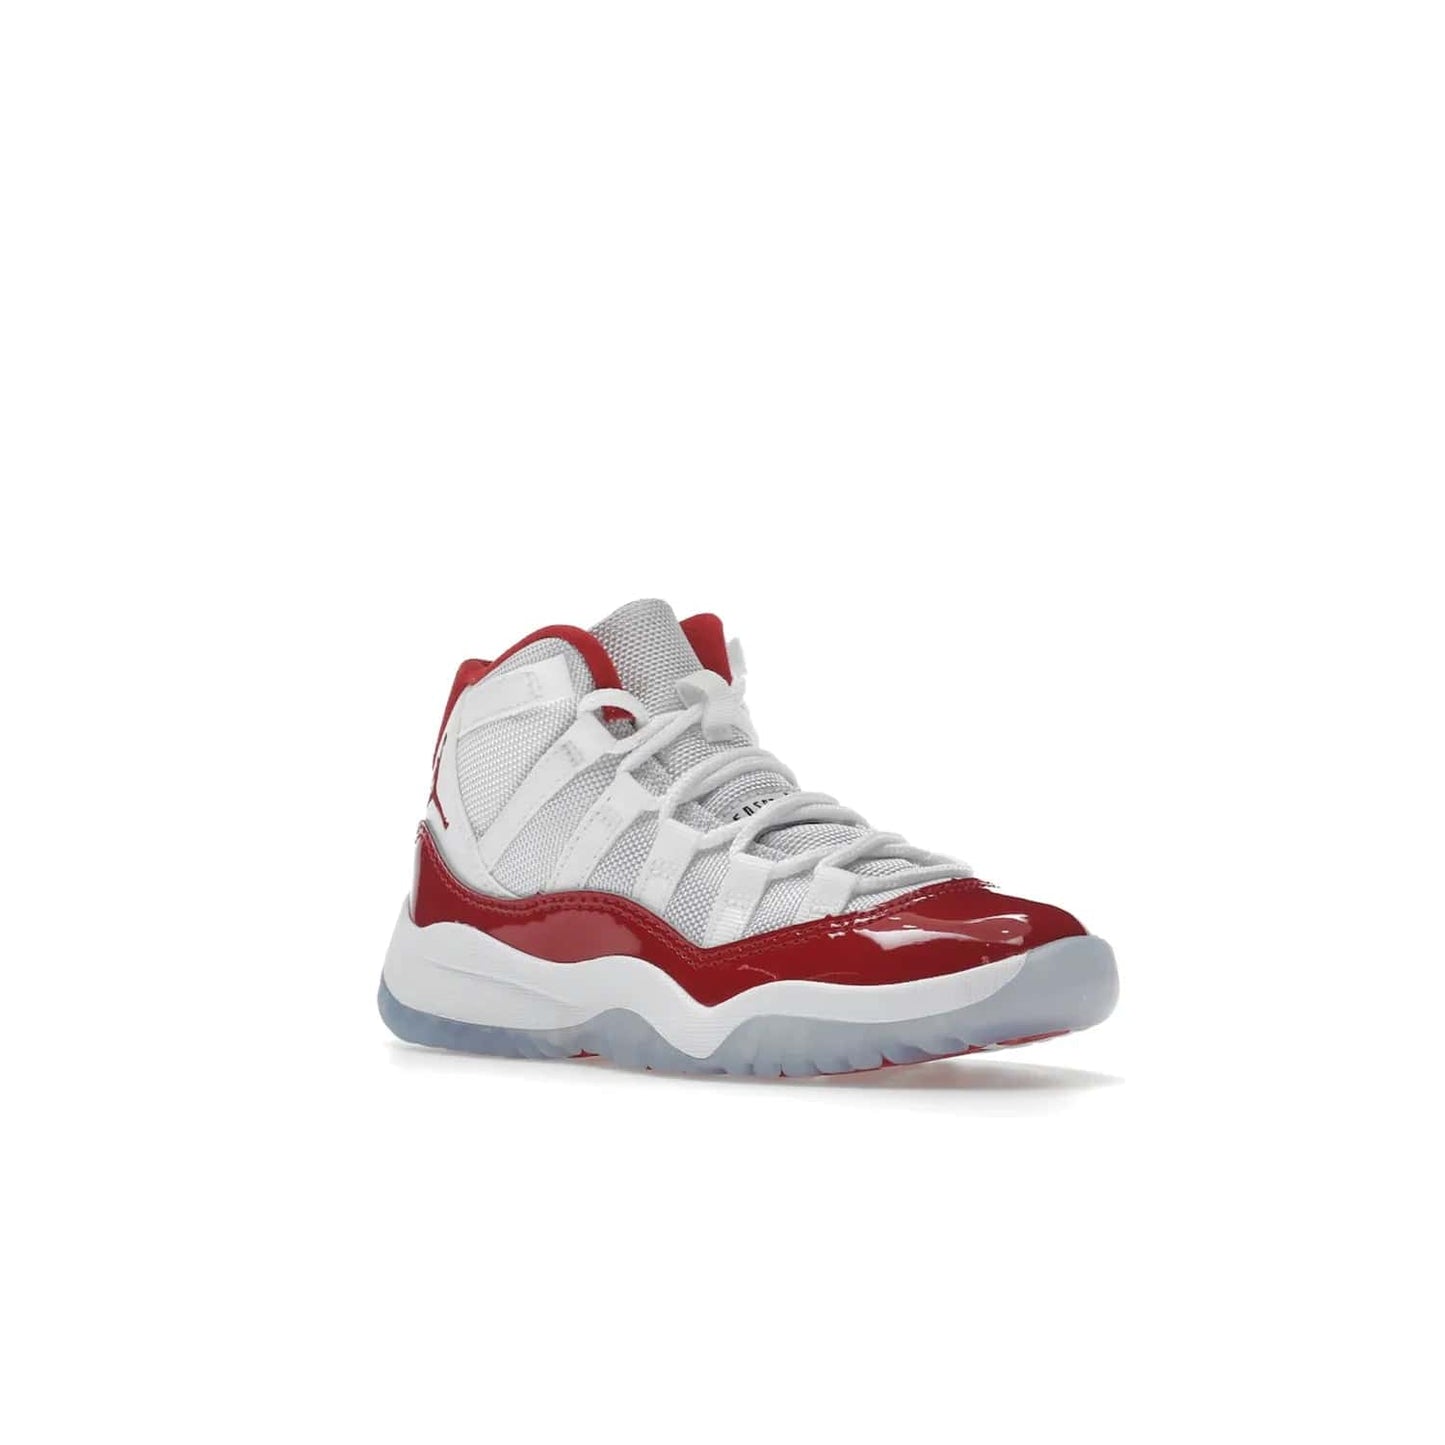 Jordan 11 Retro Cherry (2022) (PS) - Image 5 - Only at www.BallersClubKickz.com - An iconic silhouette with a timeless look, the Air Jordan 11 Retro Cherry 2022 PS features a crisp White, Varsity Red and Black colorway. The upper is made of ballistic mesh, a red patent leather mudguard, '23' branding and white Phylon midsole. Get optimal cushioning and comfort on December 10th, 2022. Don't miss out.